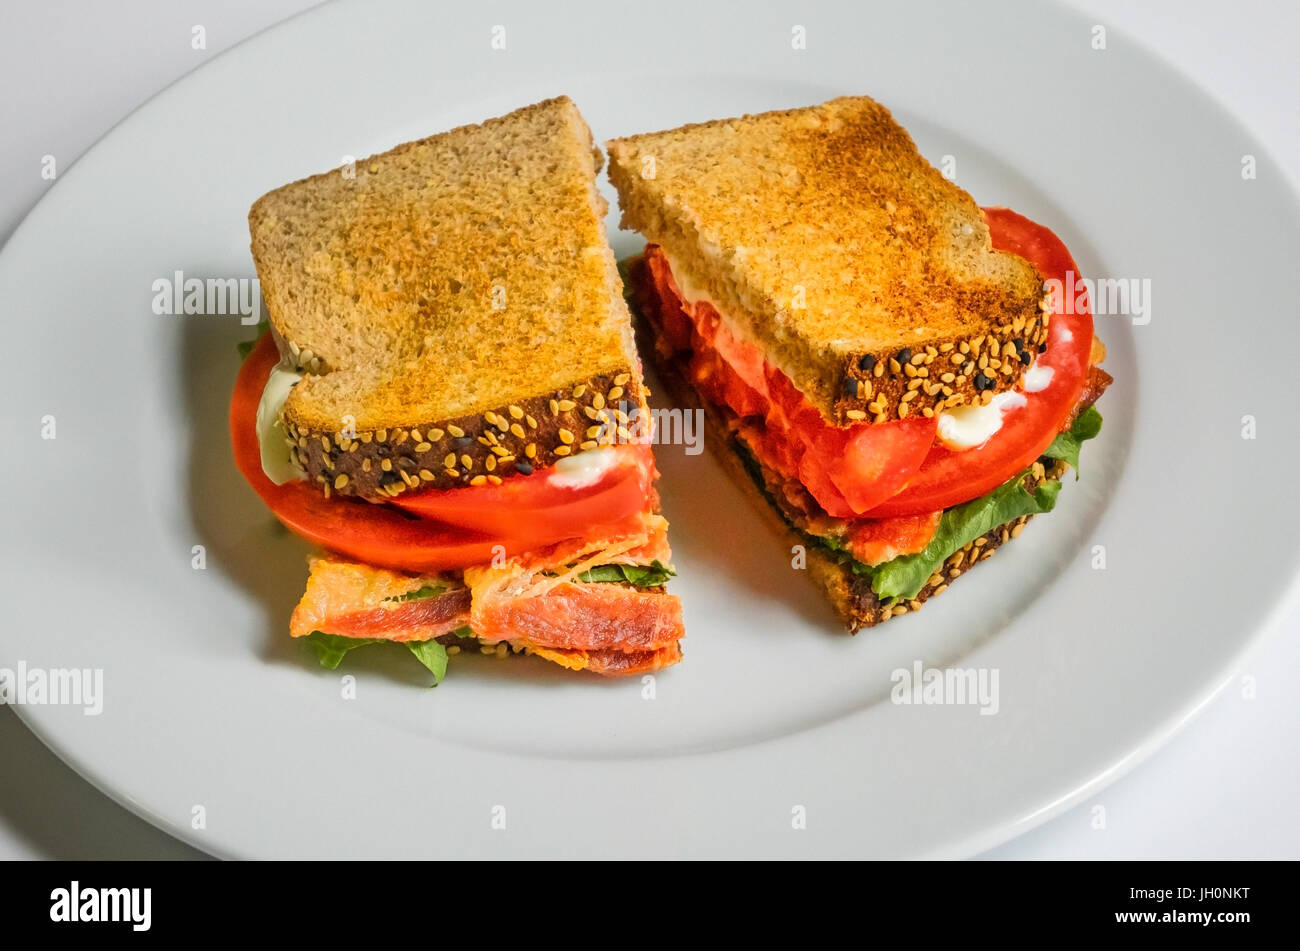 A BLT on a white dish, with bacon, lettuce, tomato, and mayonnaise on toasted wholewheat bread, a classic American sandwich Stock Photo